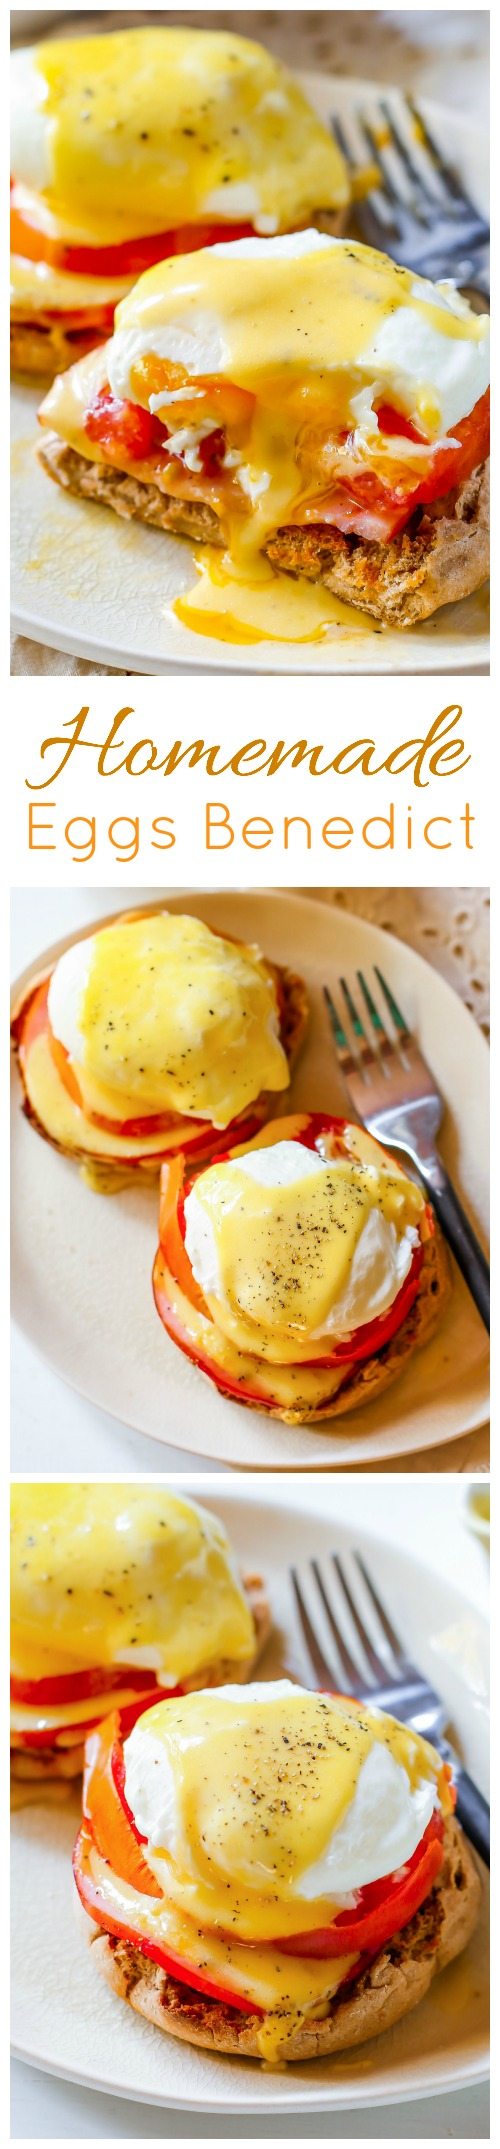 3 images of homemade eggs benedict